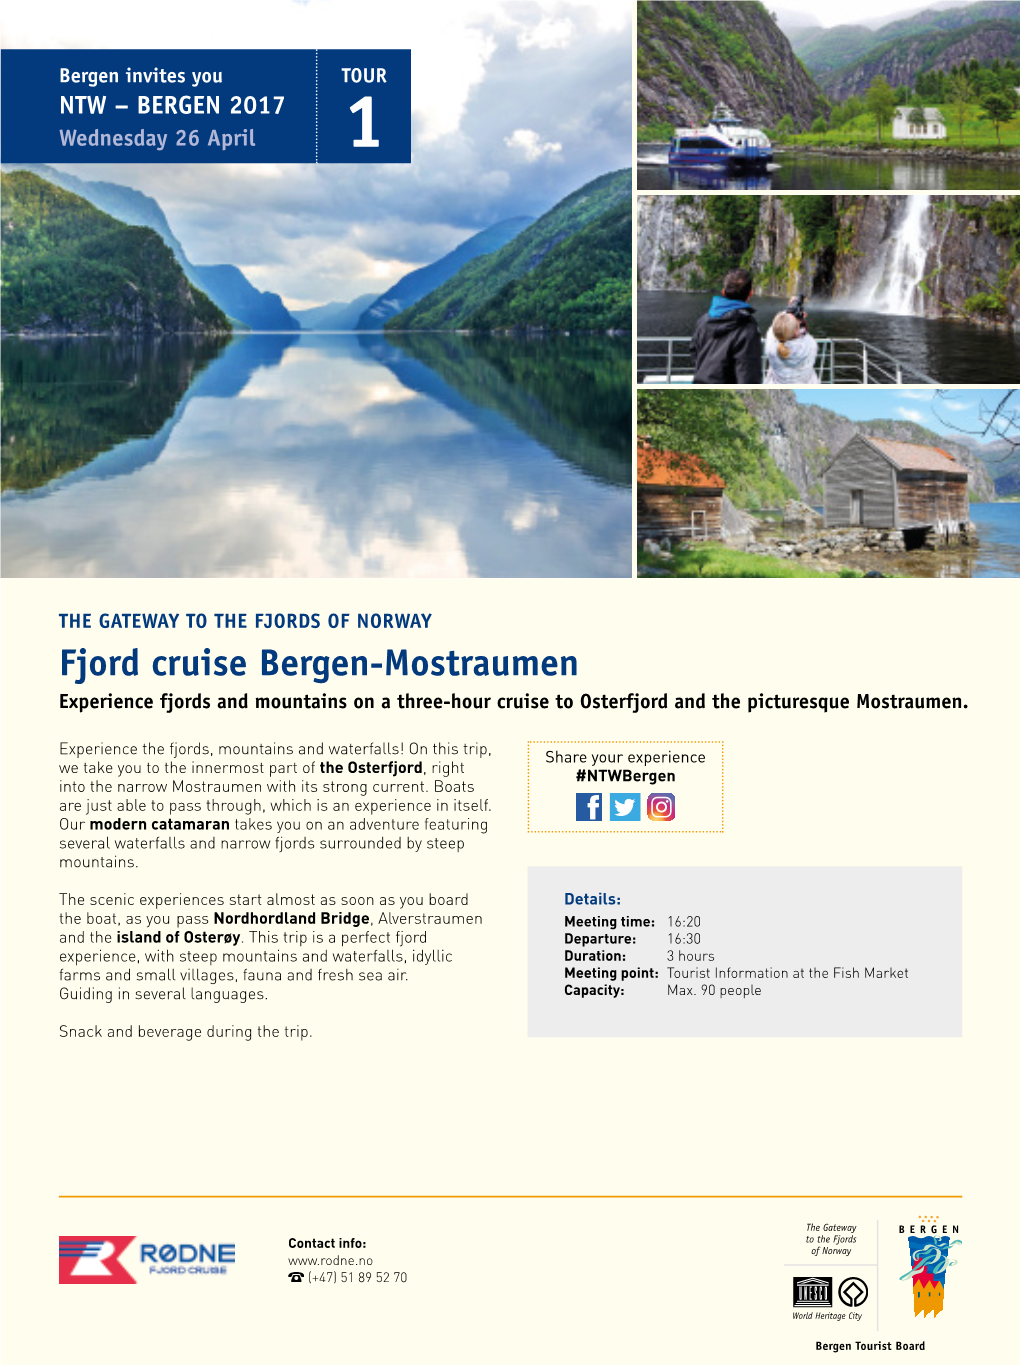 Fjord Cruise Bergen-Mostraumen Experience Fjords and Mountains on a Three-Hour Cruise to Osterfjord and the Picturesque Mostraumen